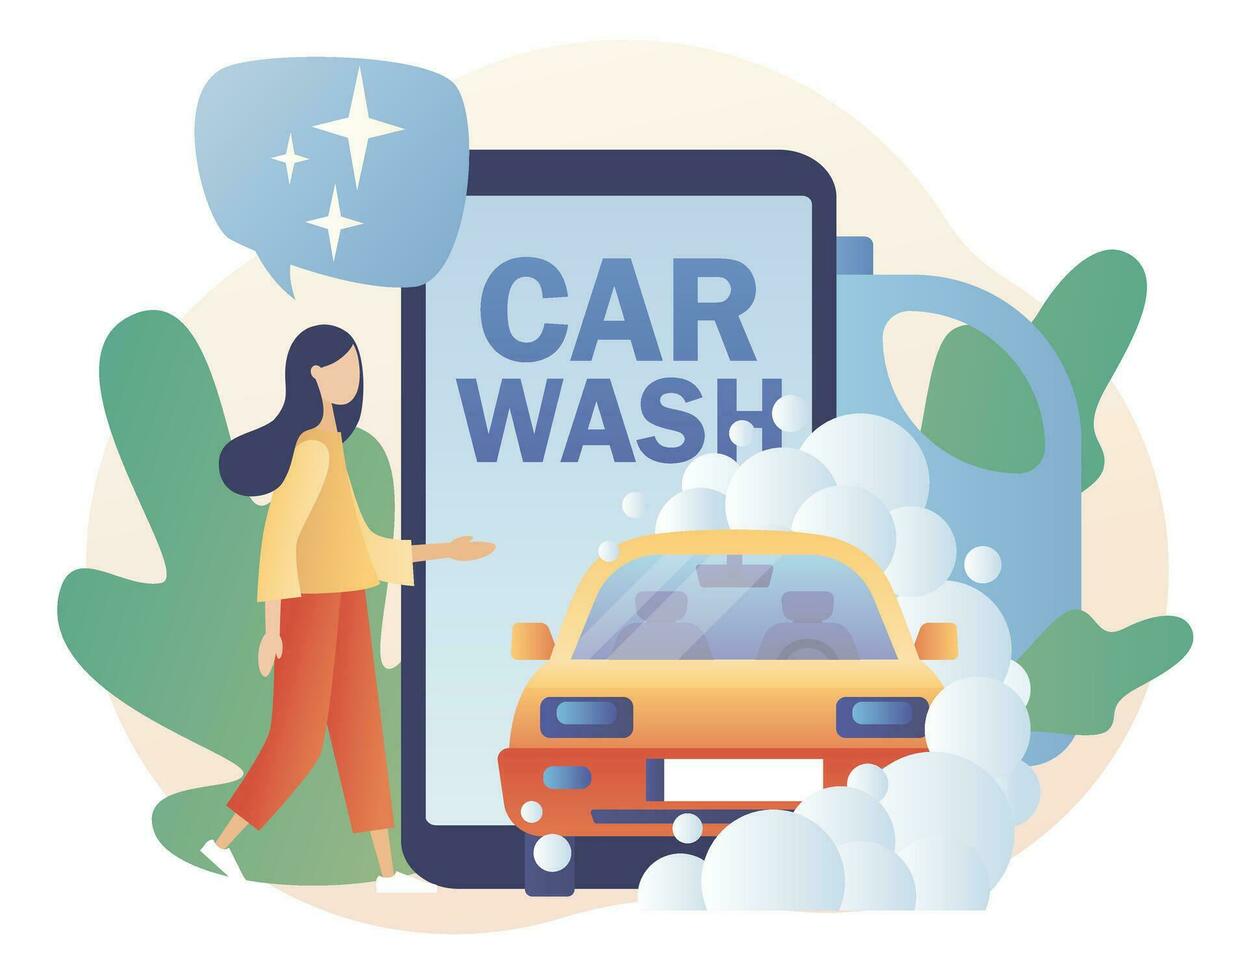 Car wash service smartphone app. Tiny people washing automobile with water and foam. Transport is clean. Modern flat cartoon style. Vector illustration on white background